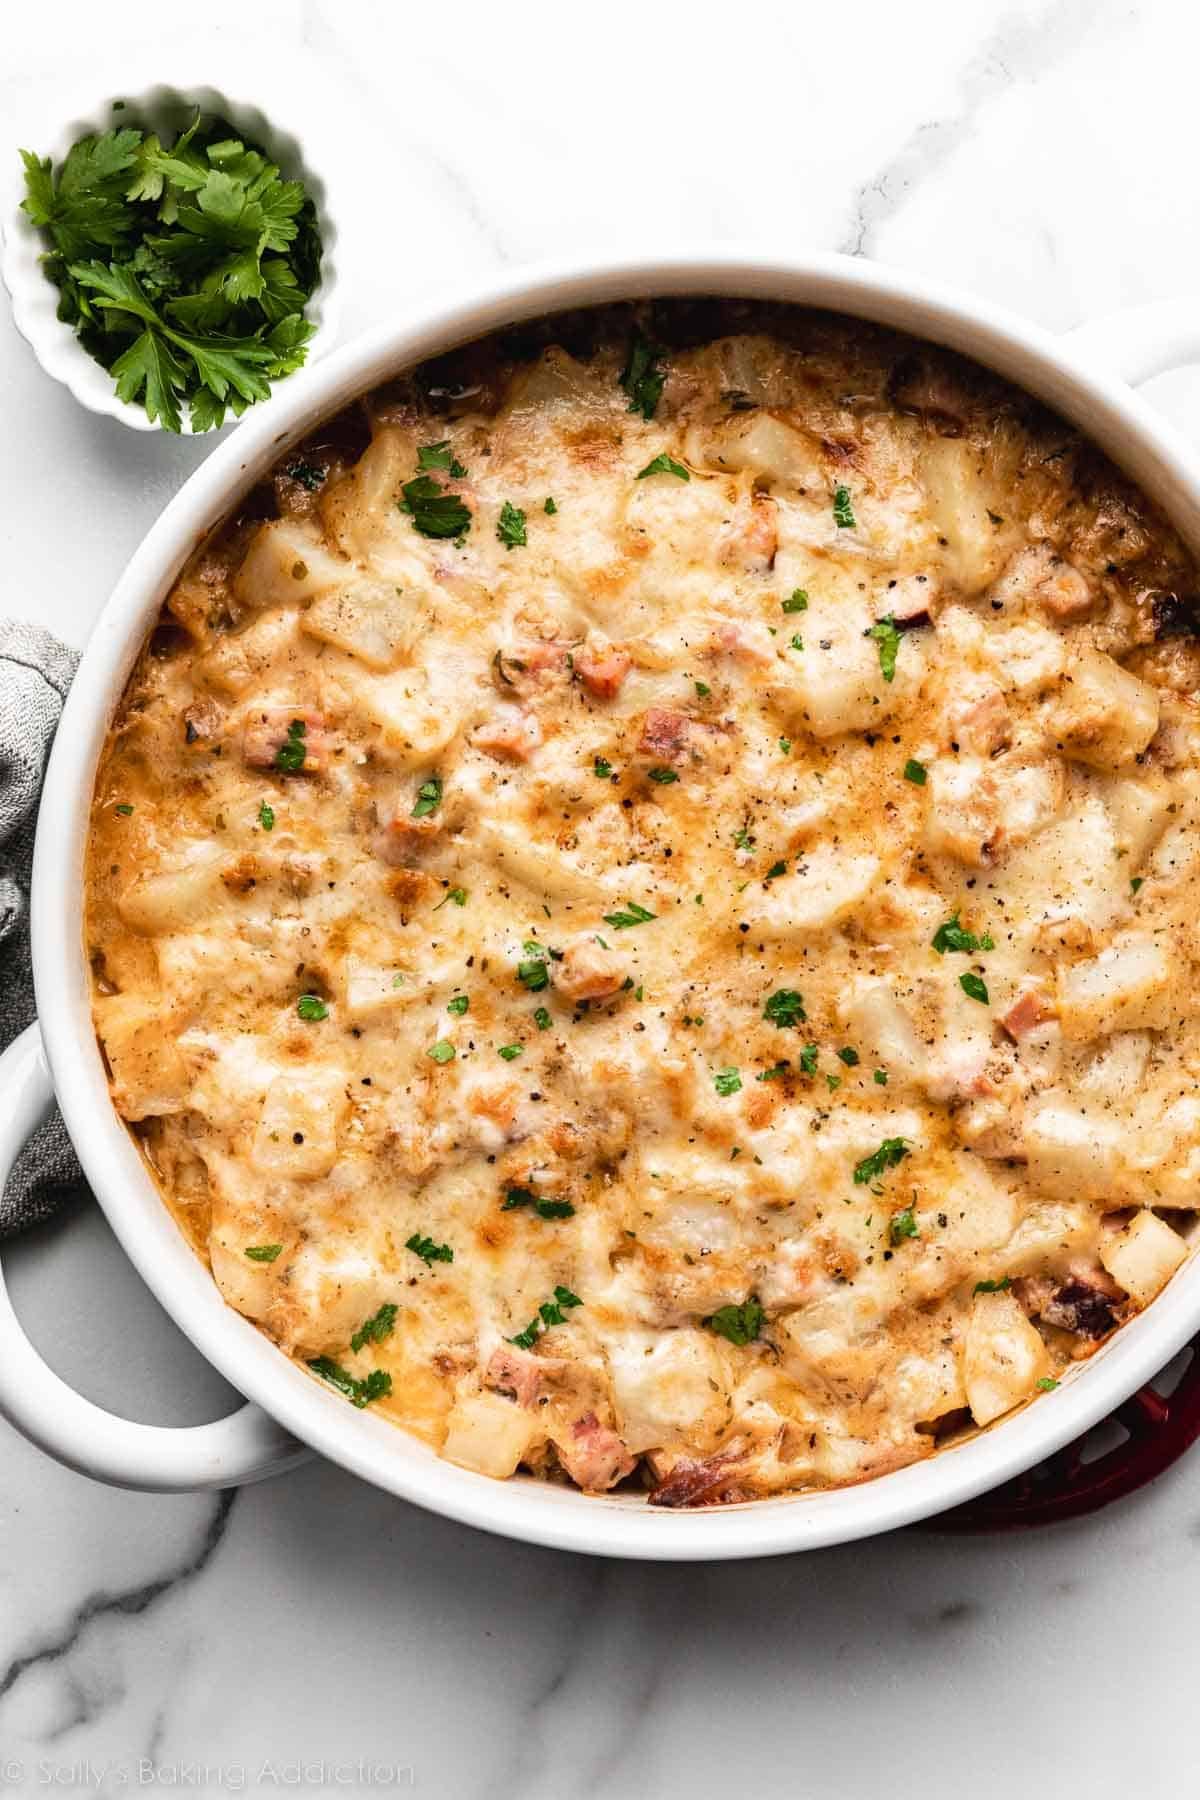 potato casserole with ham and melted cheese with fresh parsley sprinkled on top.